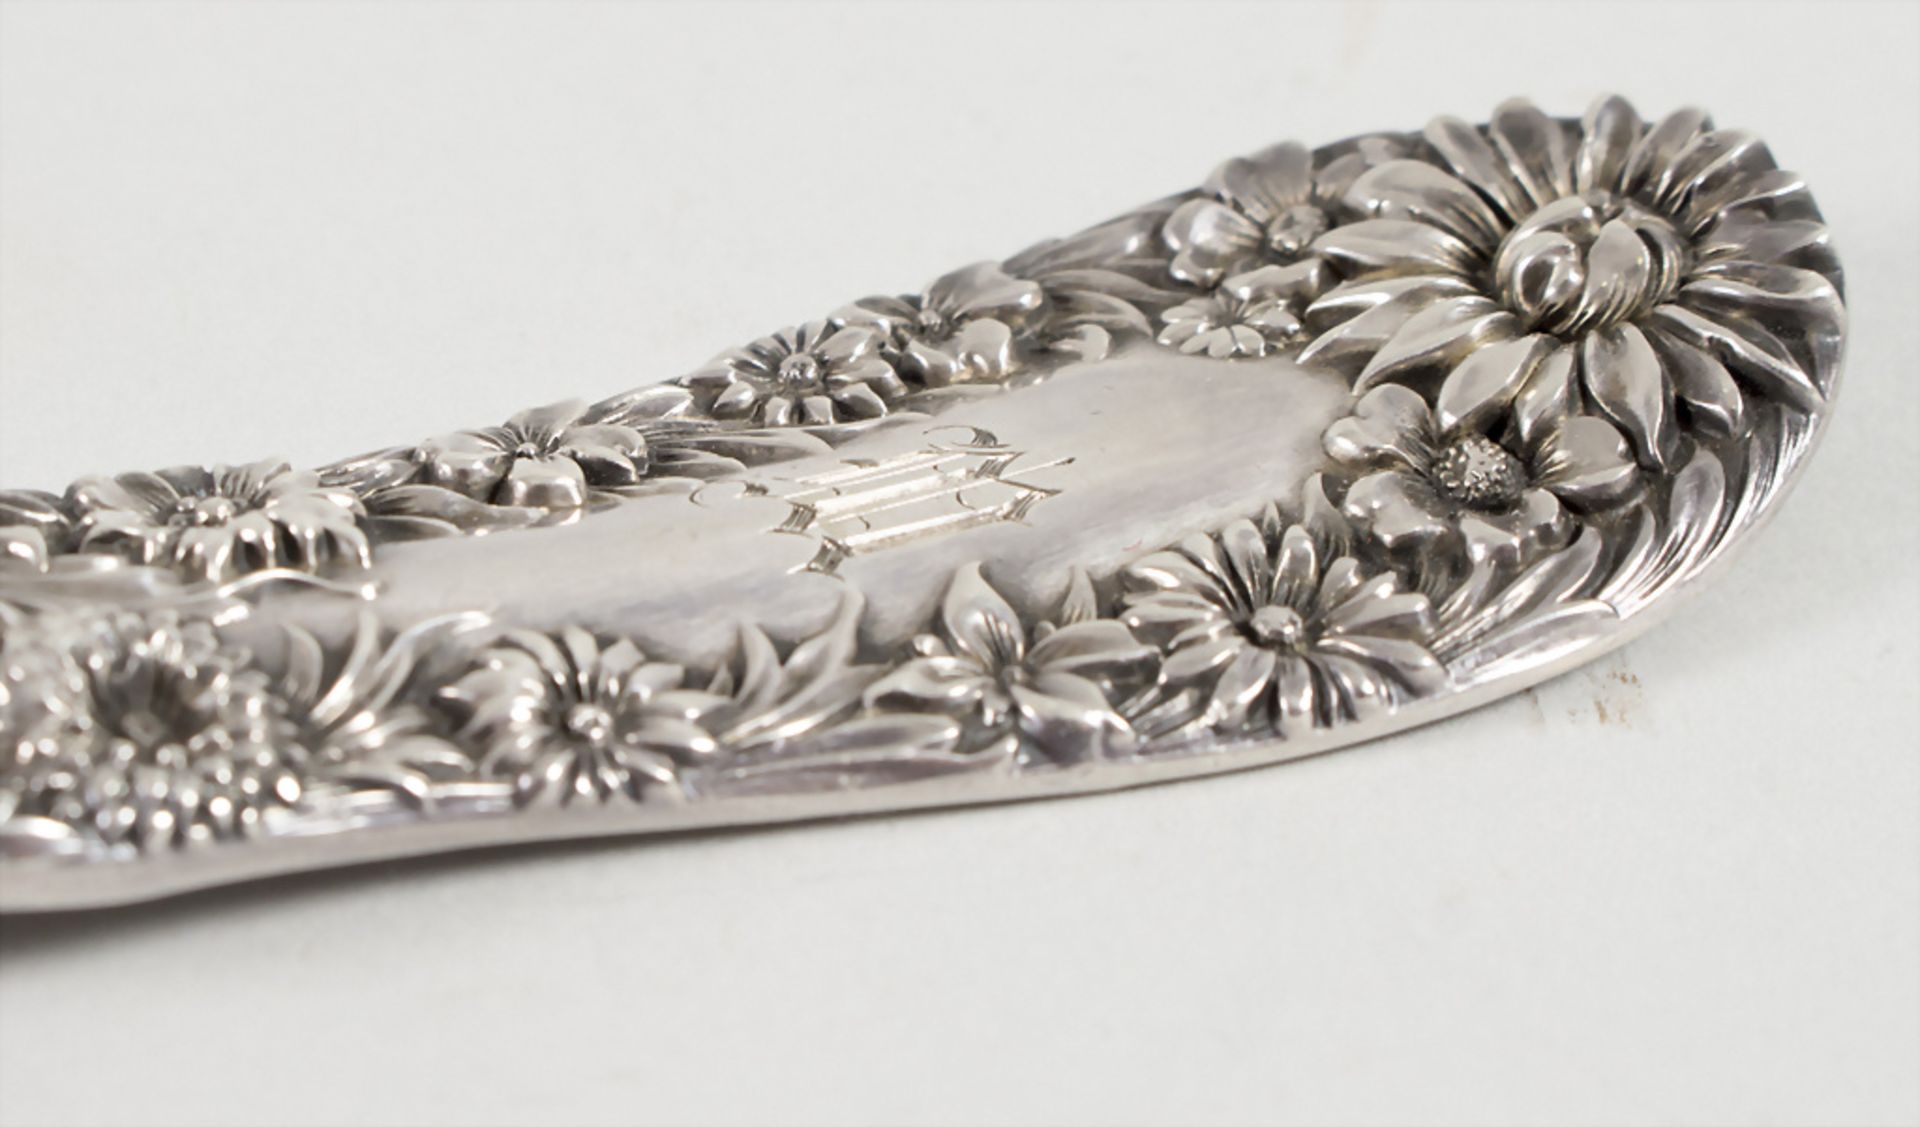 Suppenkelle 'No. 10' / A silver blossom soup ladle 'No. 10', Dominick & Haff, New York, um 1896 - Image 3 of 7